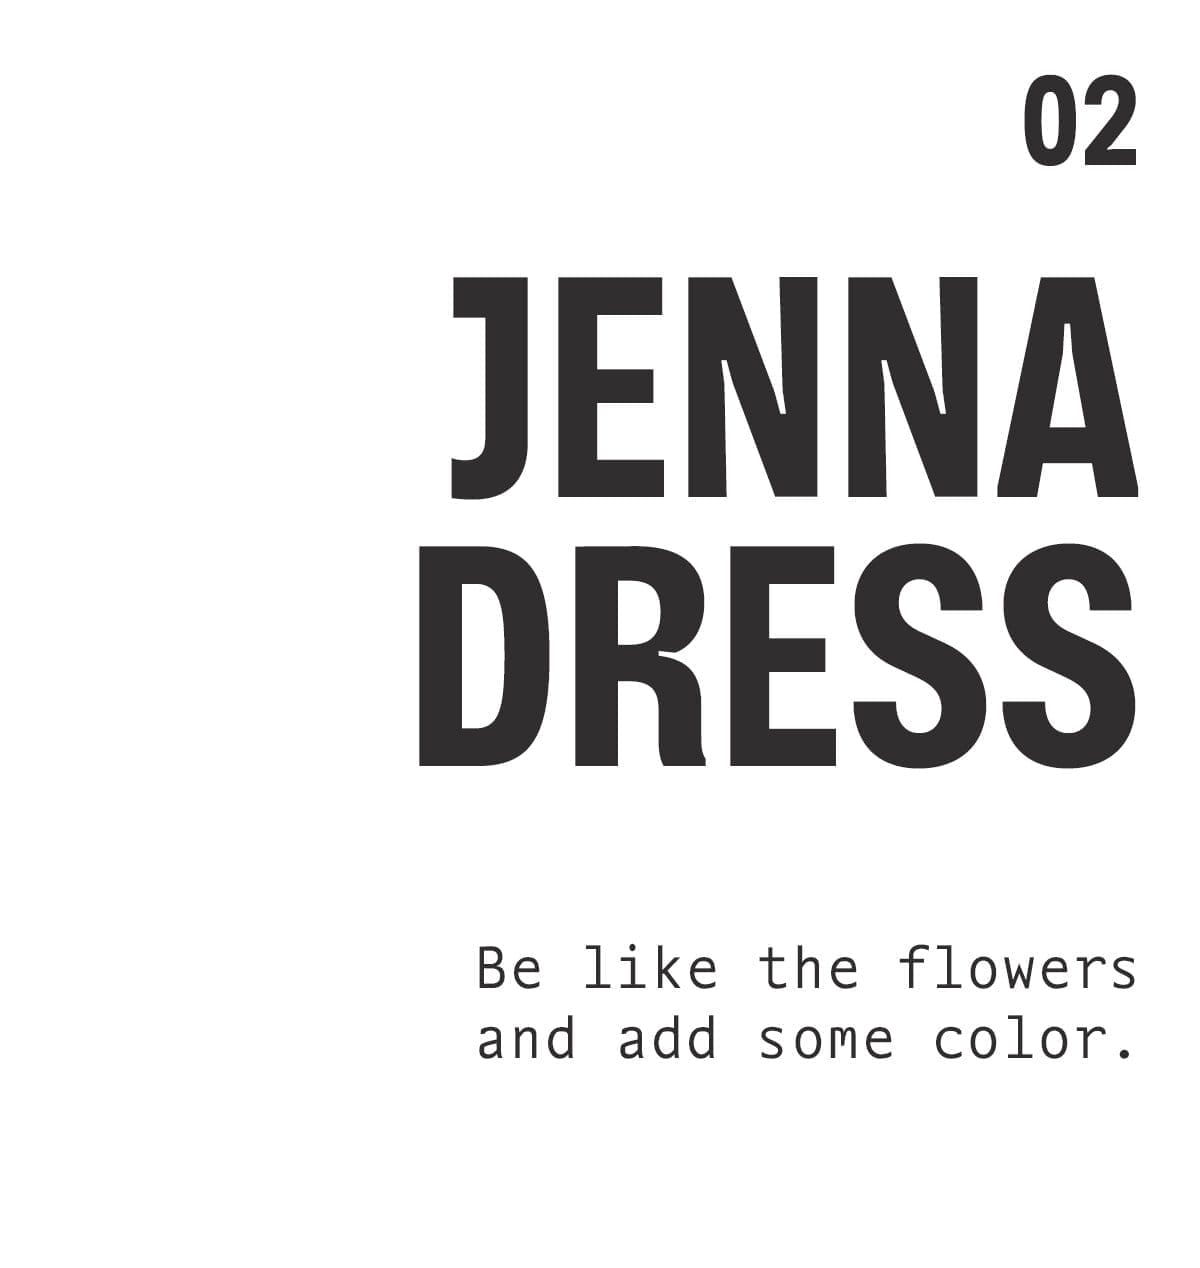 02 | JENNA DRESS. Be like the flowers and add some color.